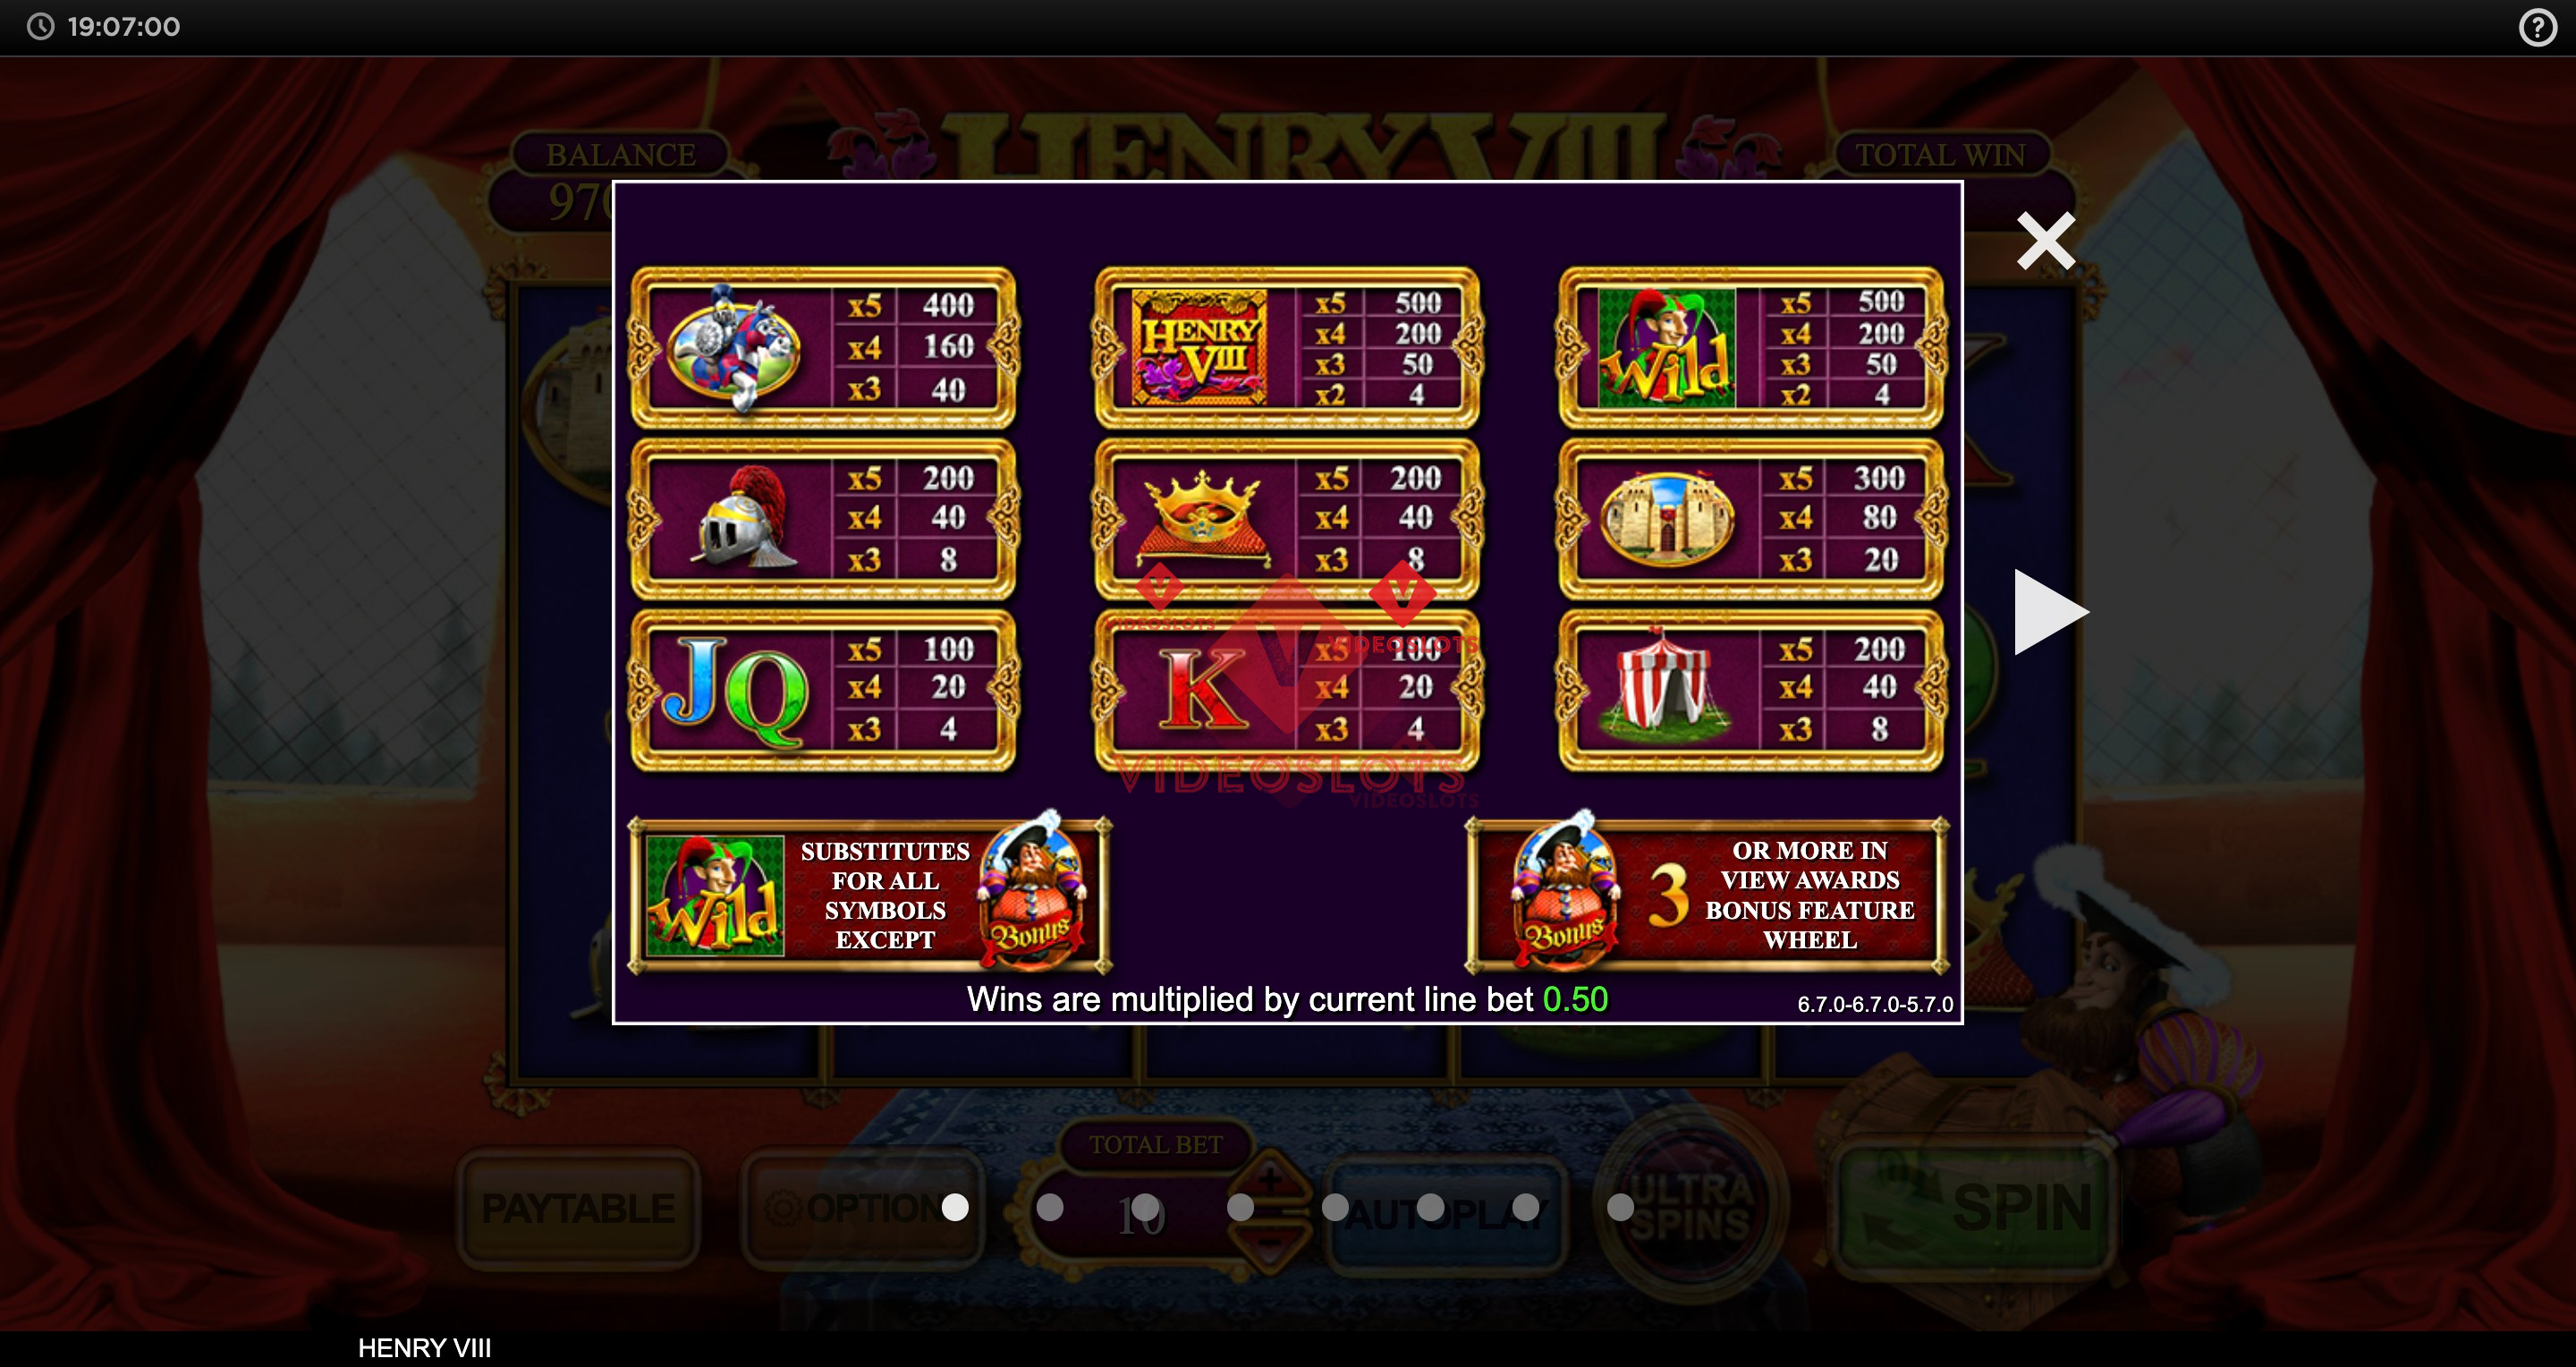 Pay Table for Henry VIII slot from Inspired Gaming